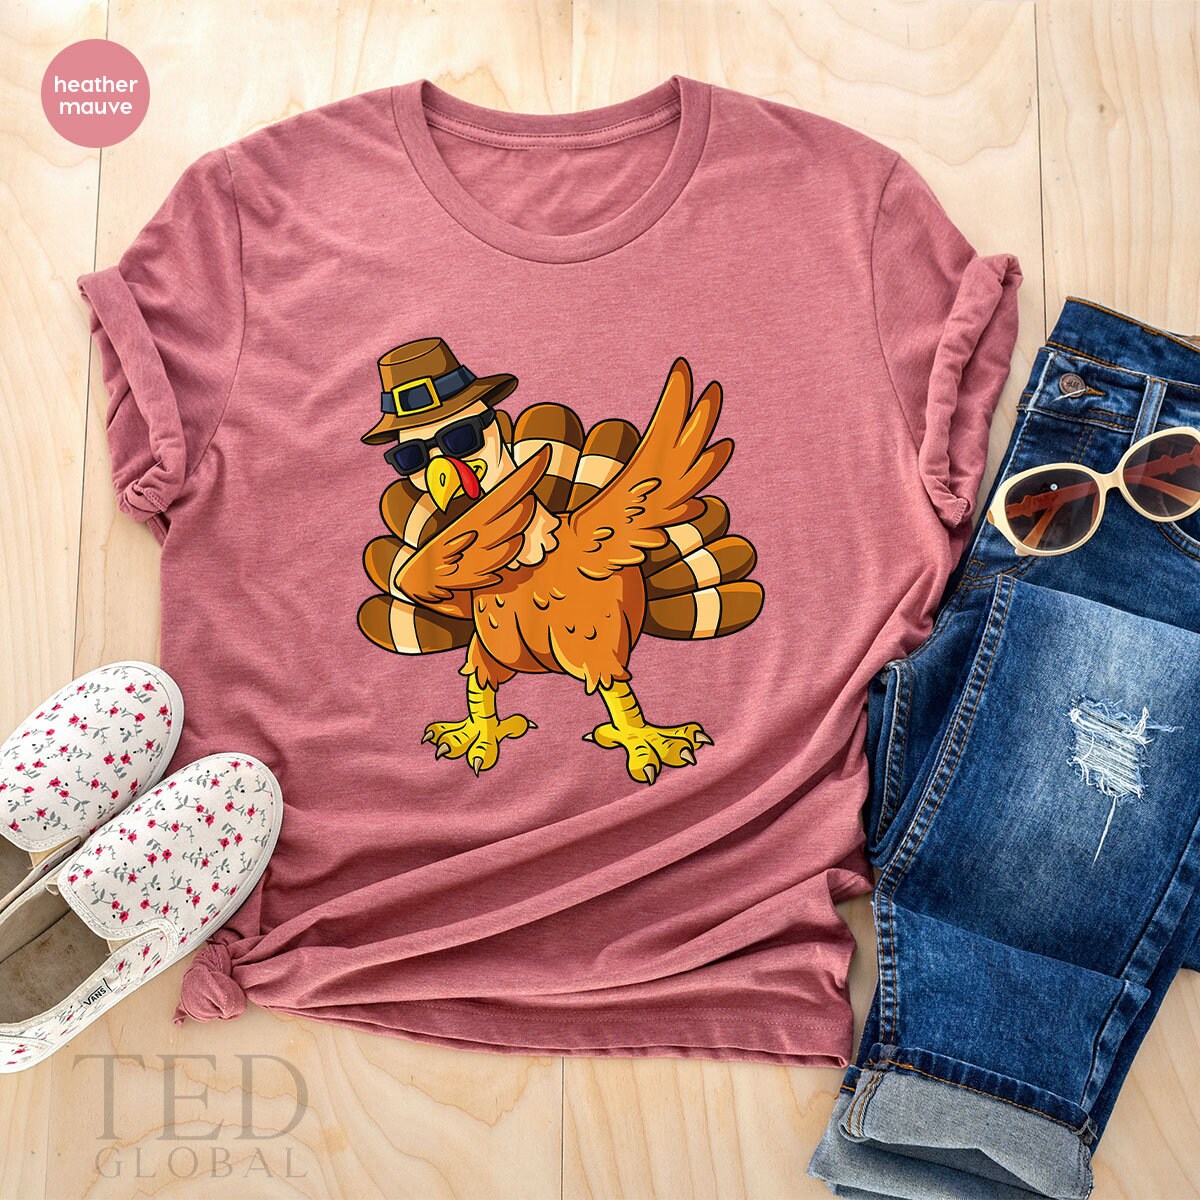 Family Thanksgiving Party T-Shirt, Coolest Turkey T Shirt,Fall Shirts, Wine Turkey Family Shirt, Funny Turkey TShirt, Gift For Thanksgiving - Fastdeliverytees.com